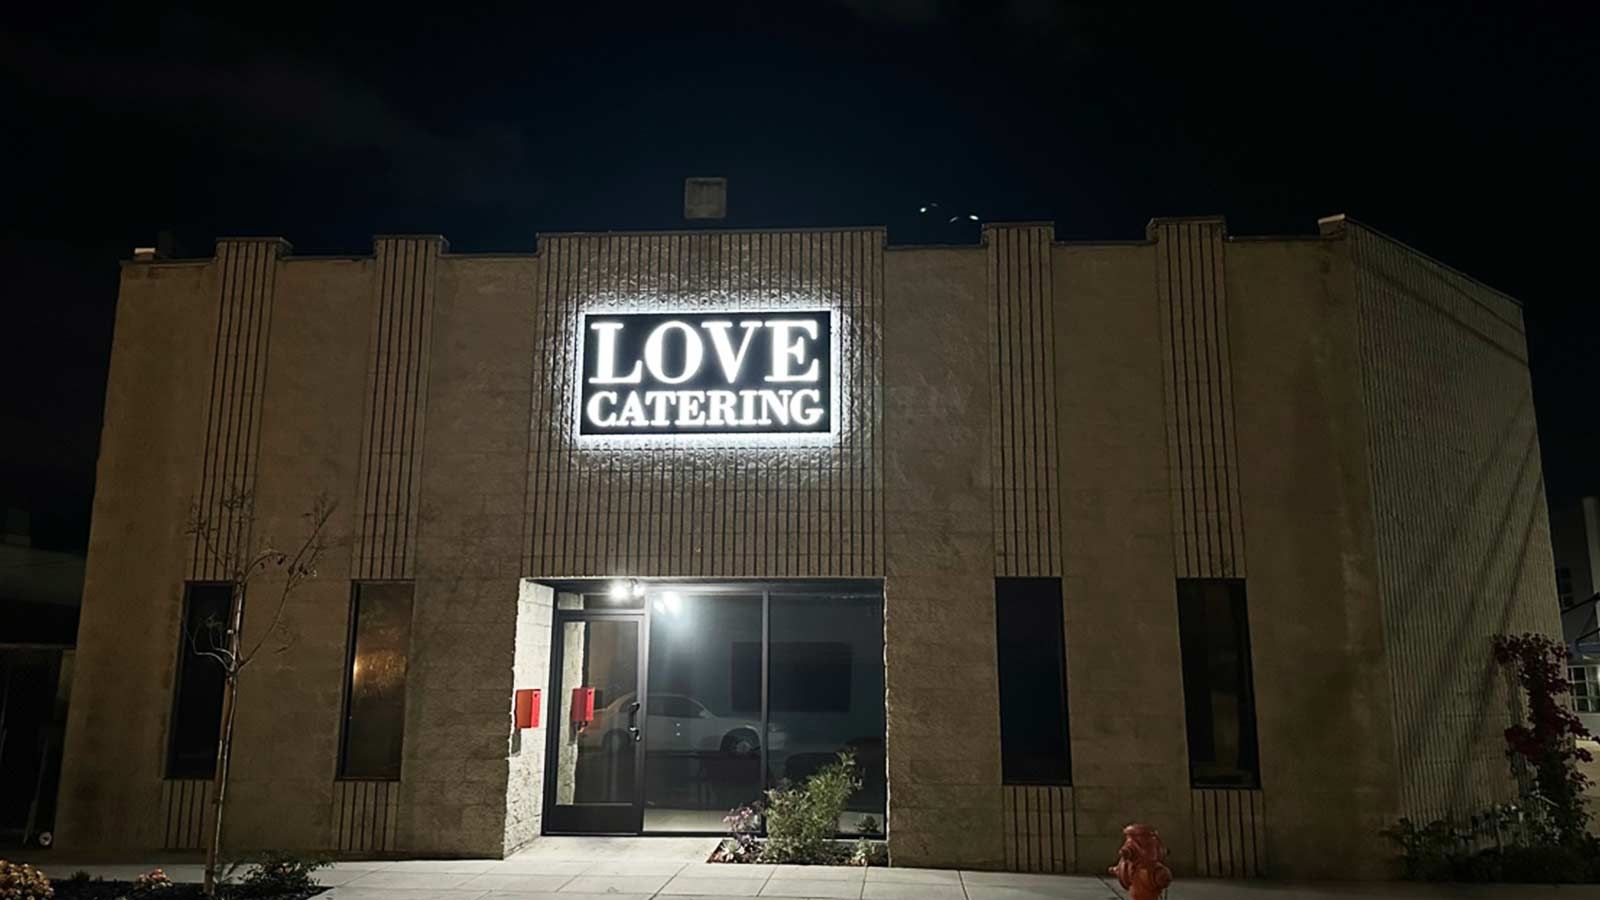 Love Catering, Inc. light box sign mounted on the facade